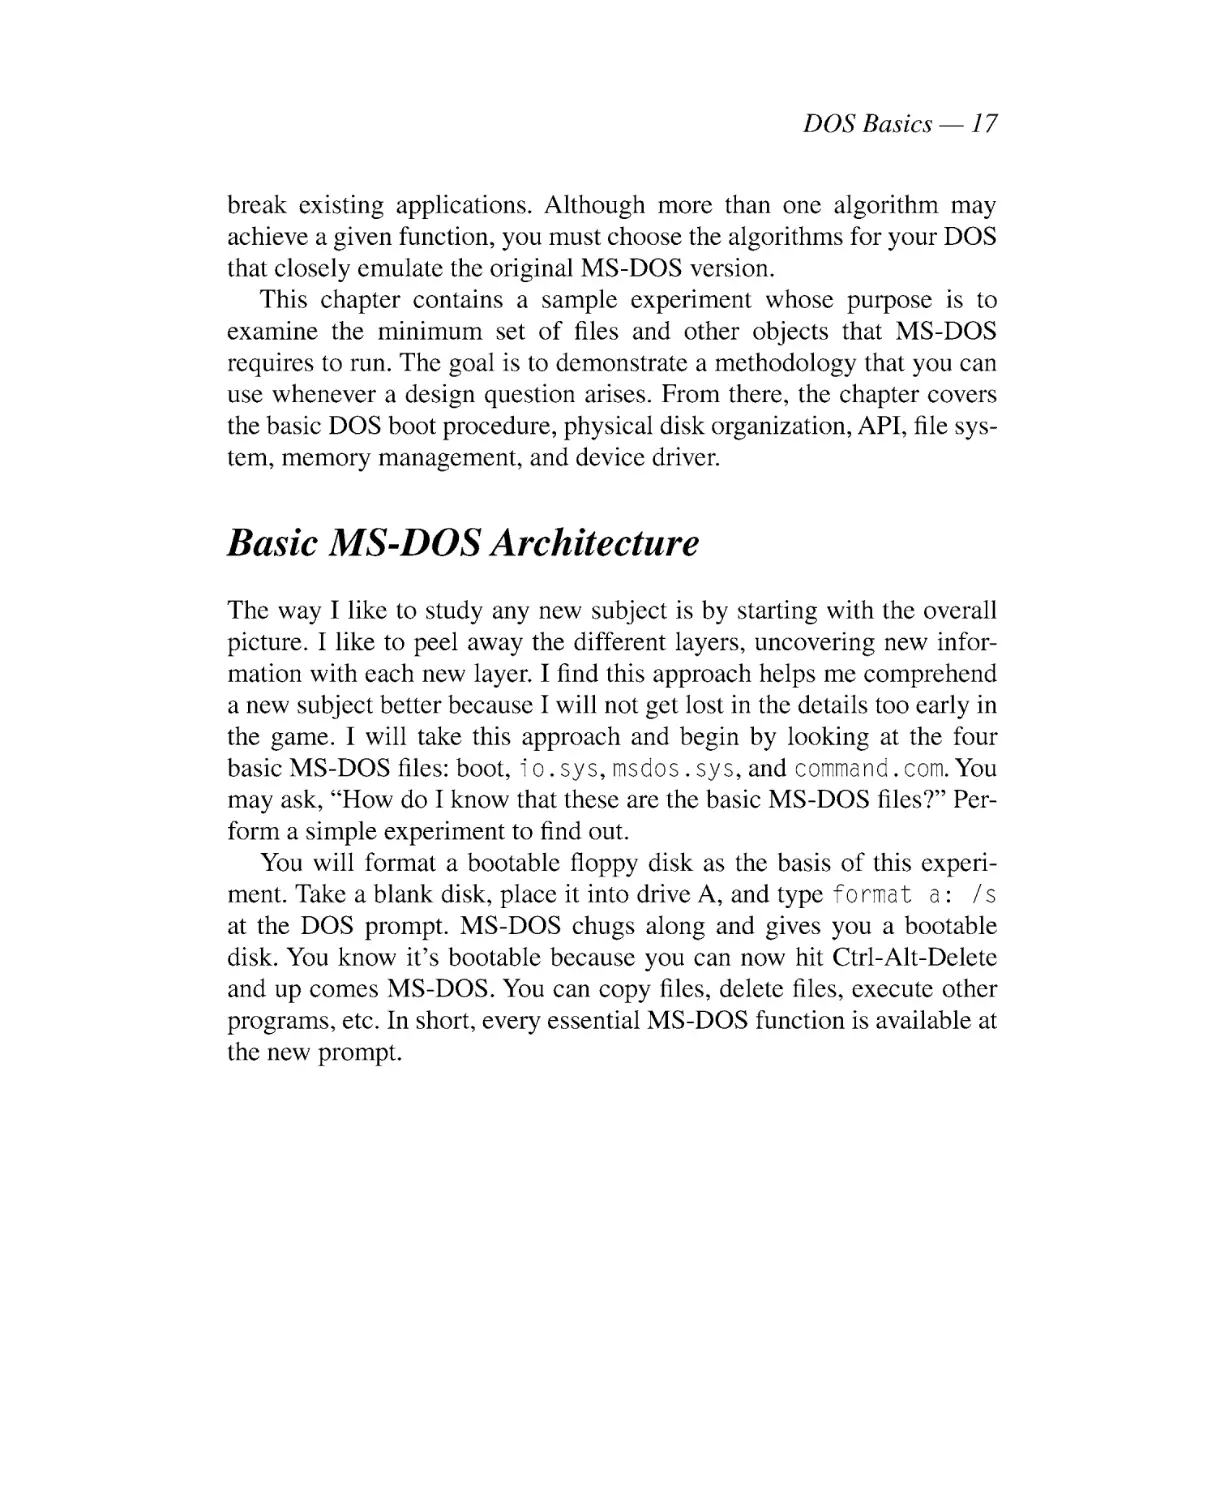 Basic MS-DOS Architecture